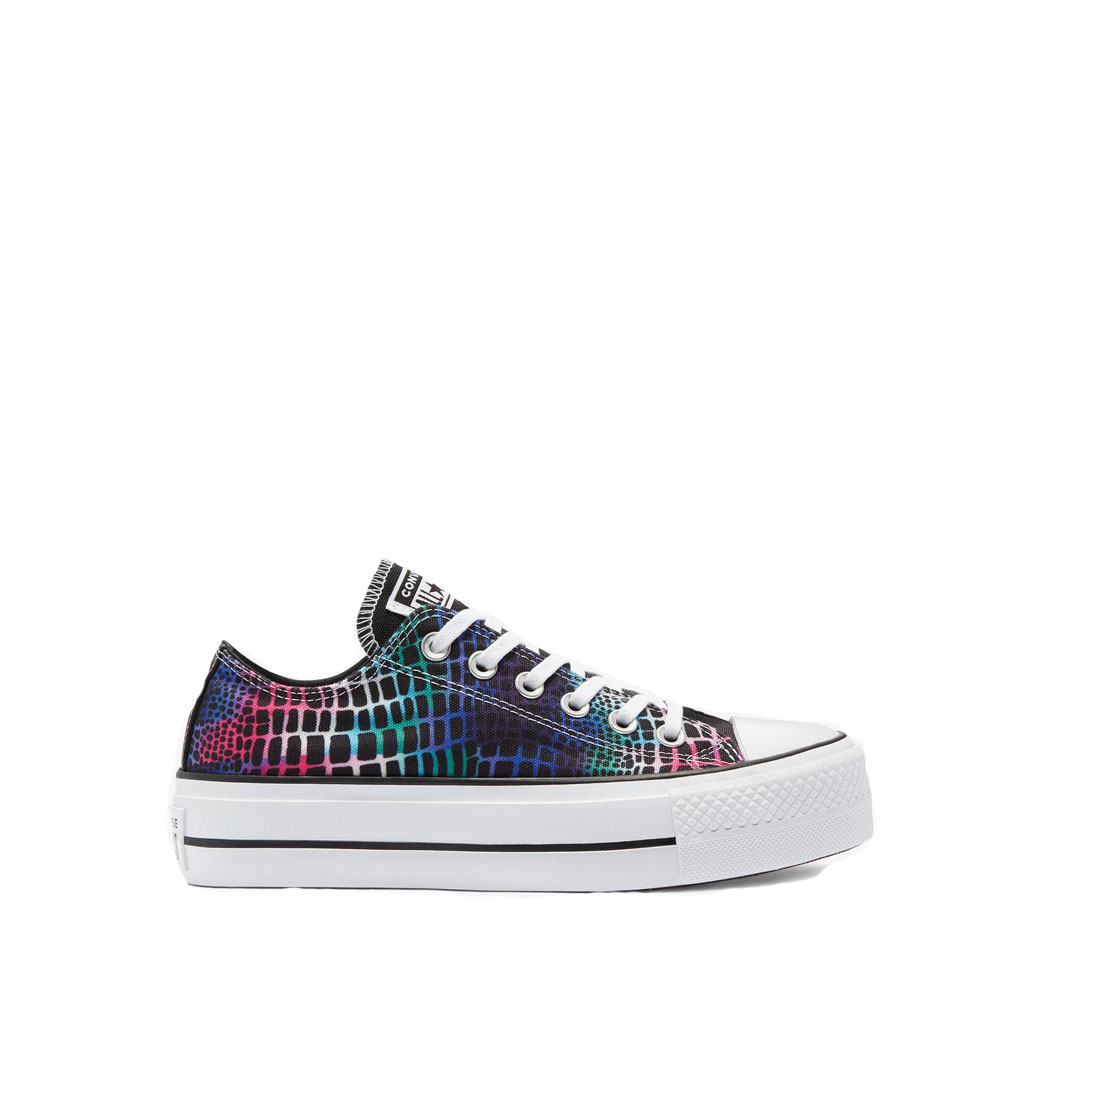 Converse Chuck Taylor All Star Low Top  Black Hyper Pink White - image 1 of 2